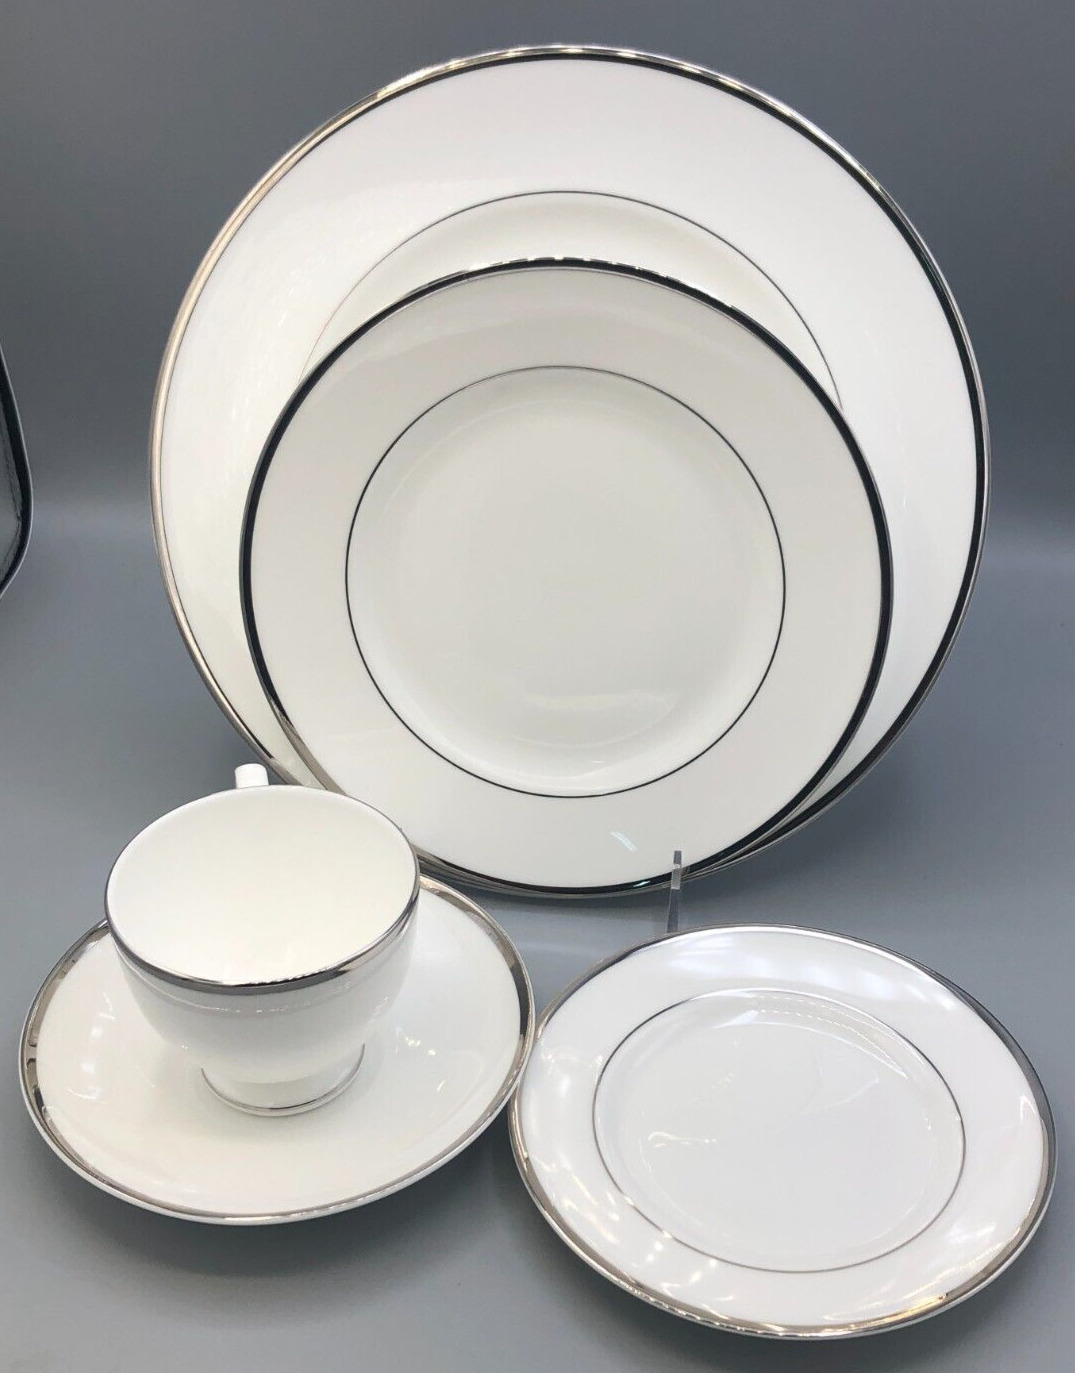 Sterling fine china by Wedgewood  5 Piece Place Settings, new in box